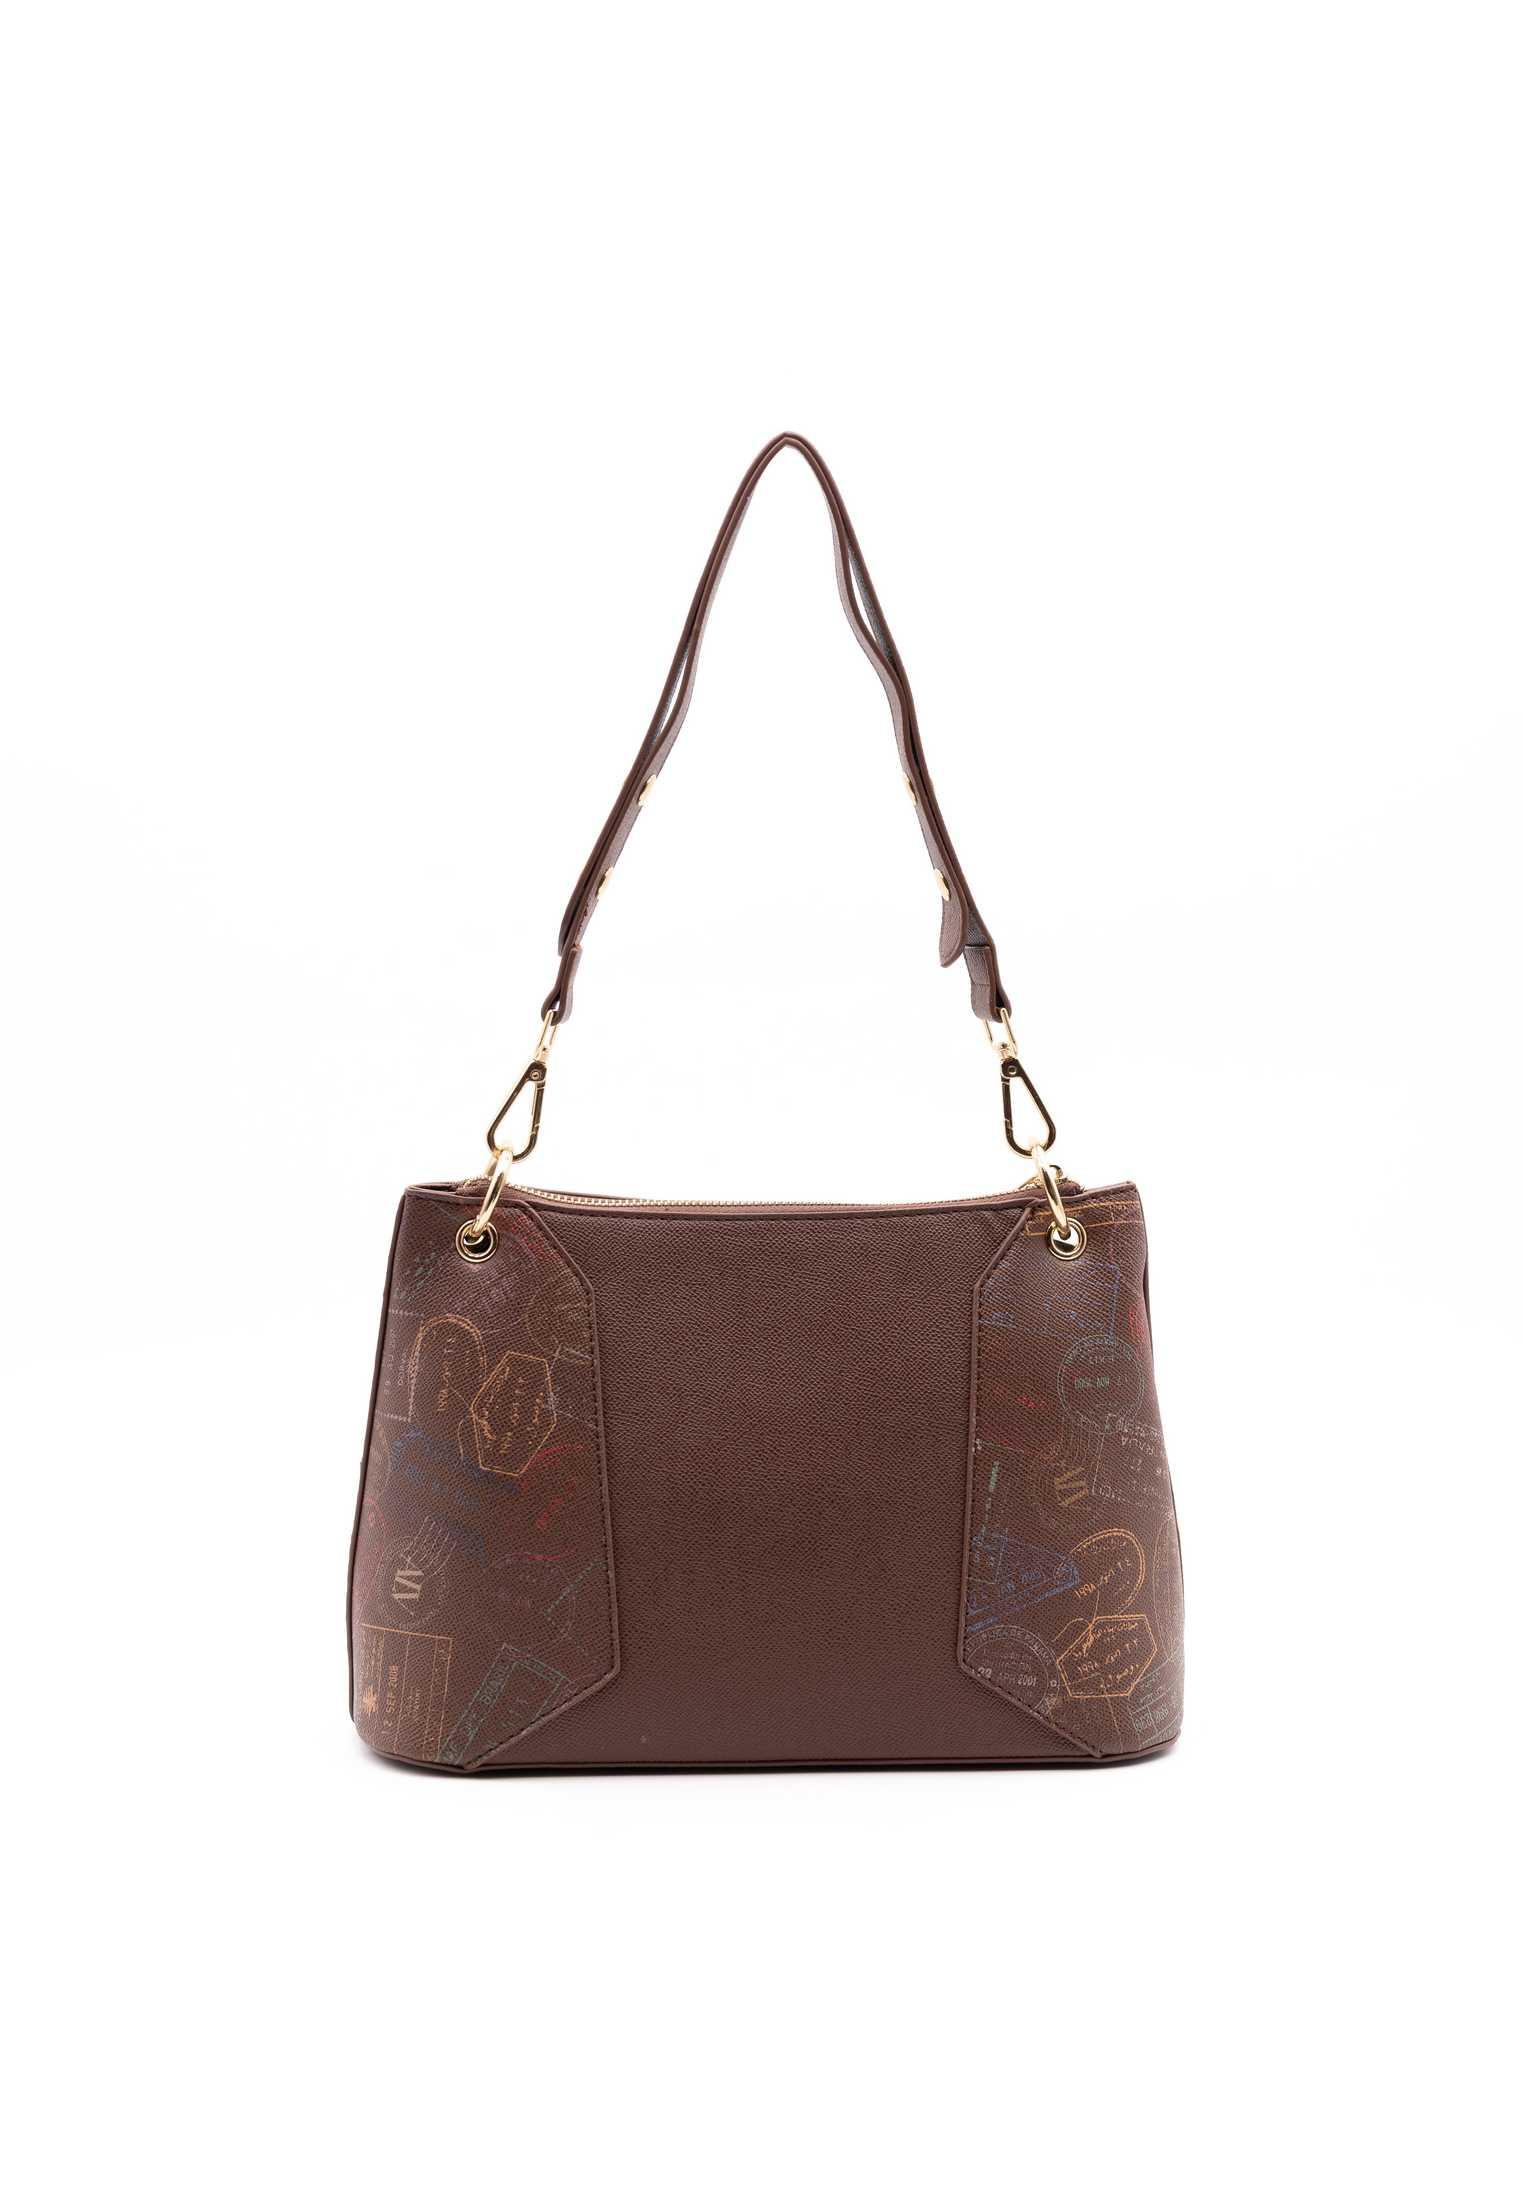 ALV by Alviero Martini  Shoulder Bags Collection Air Bag 